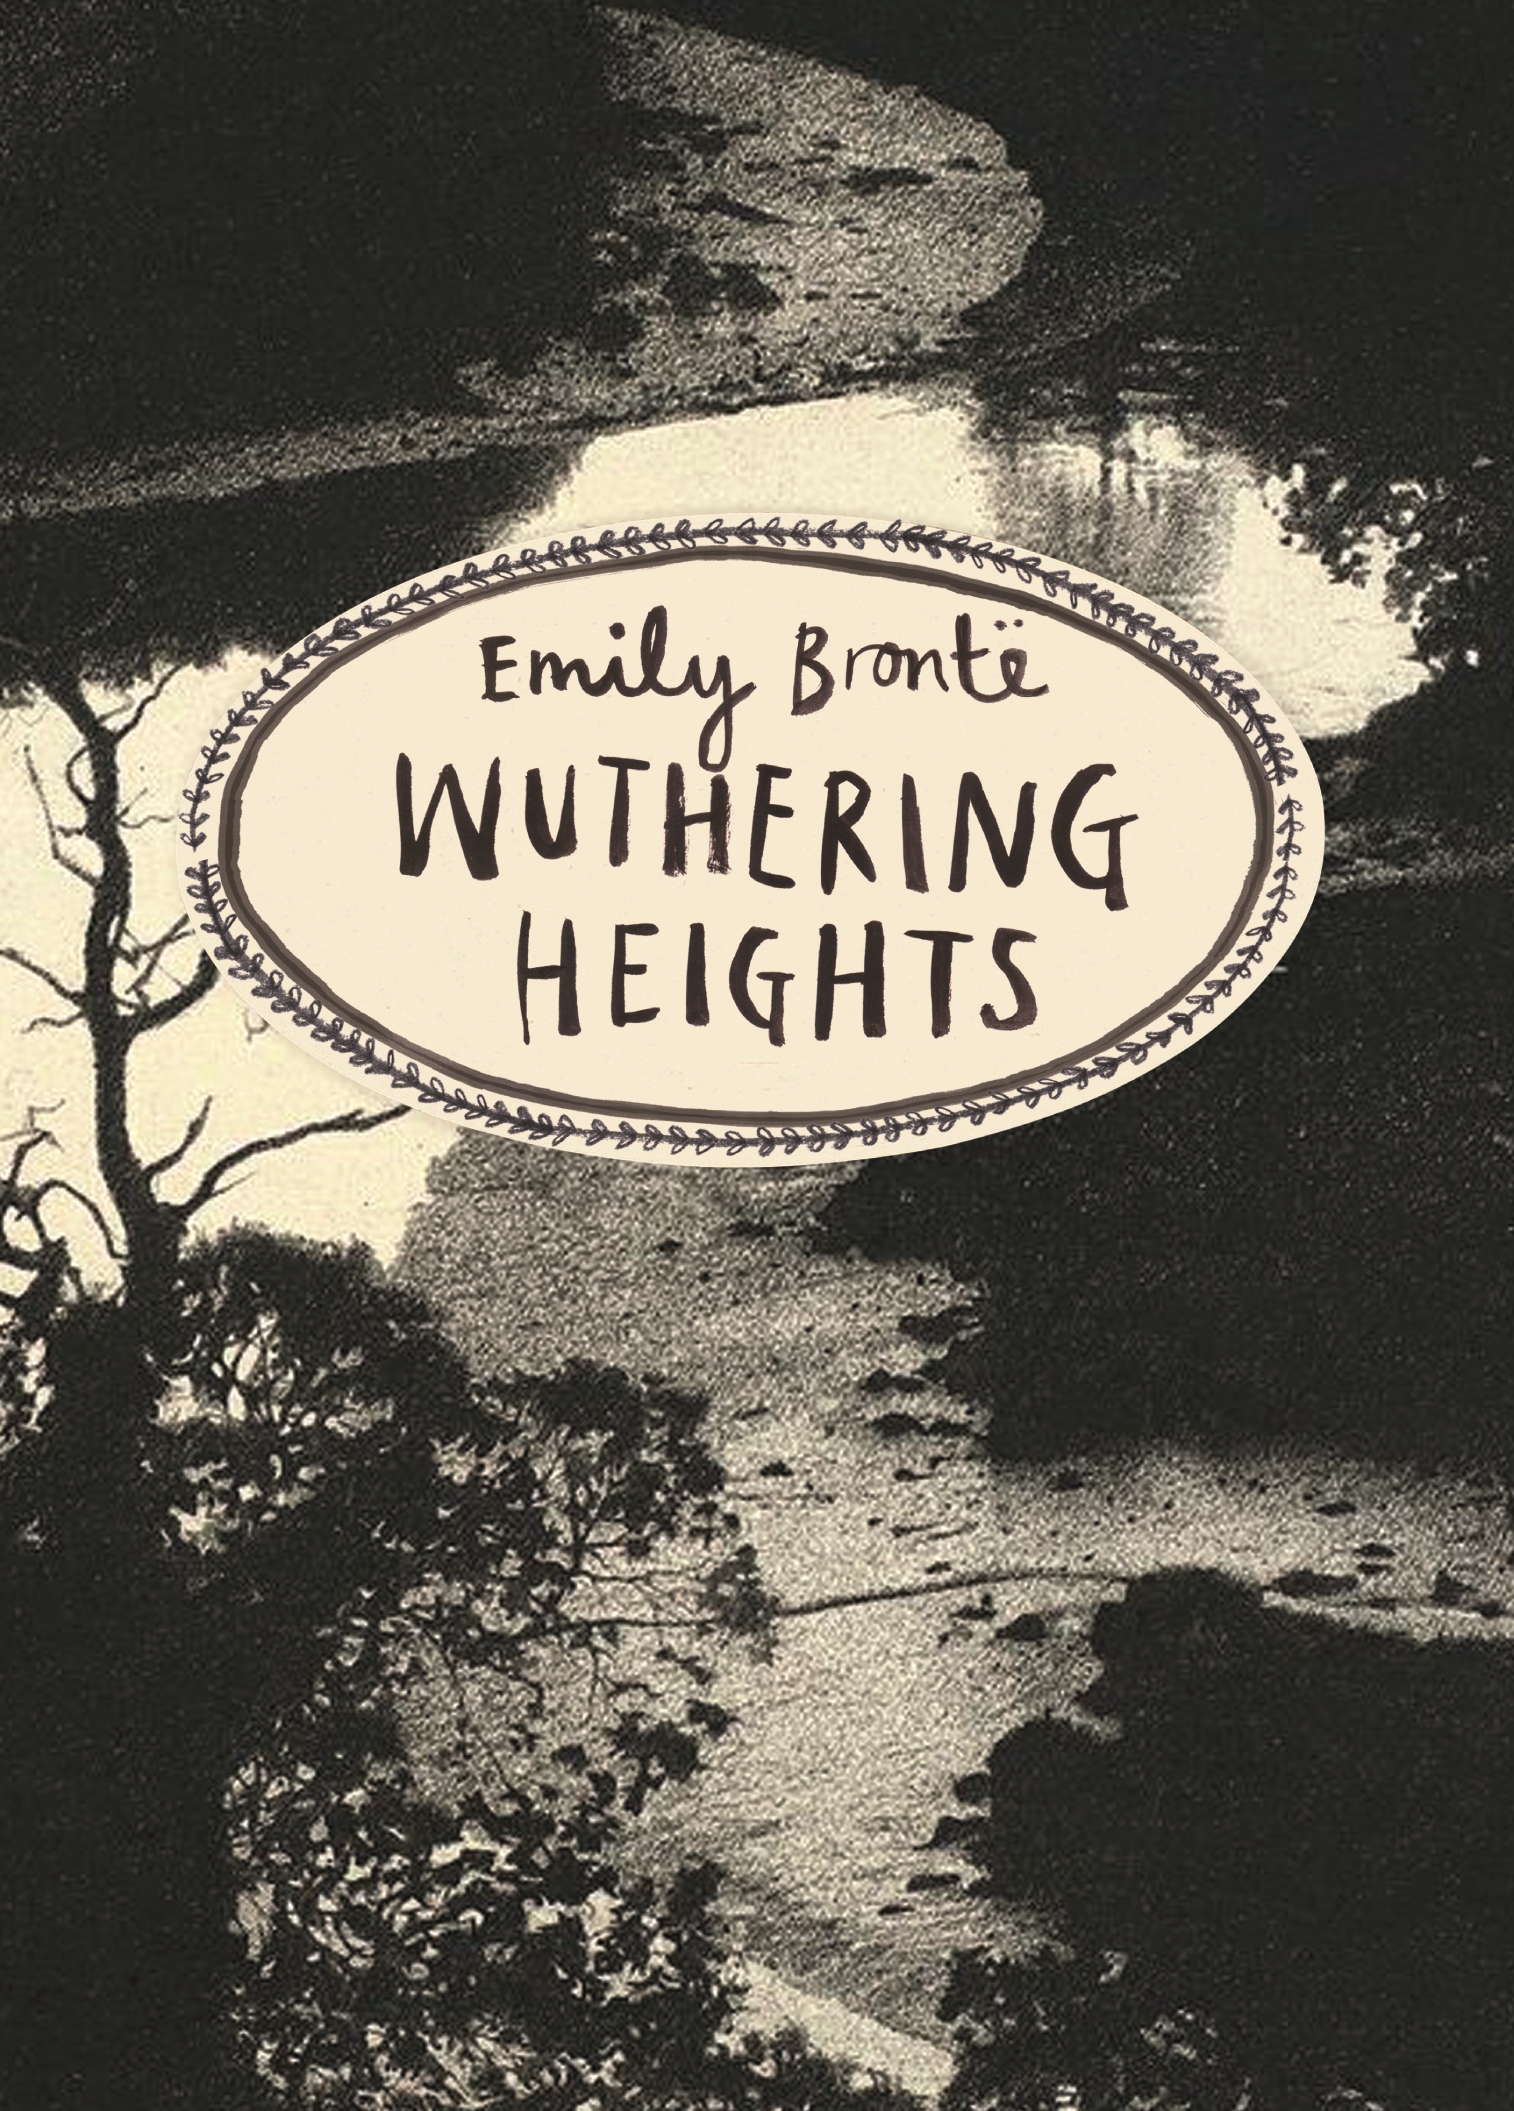 Original Wuthering Heights Book